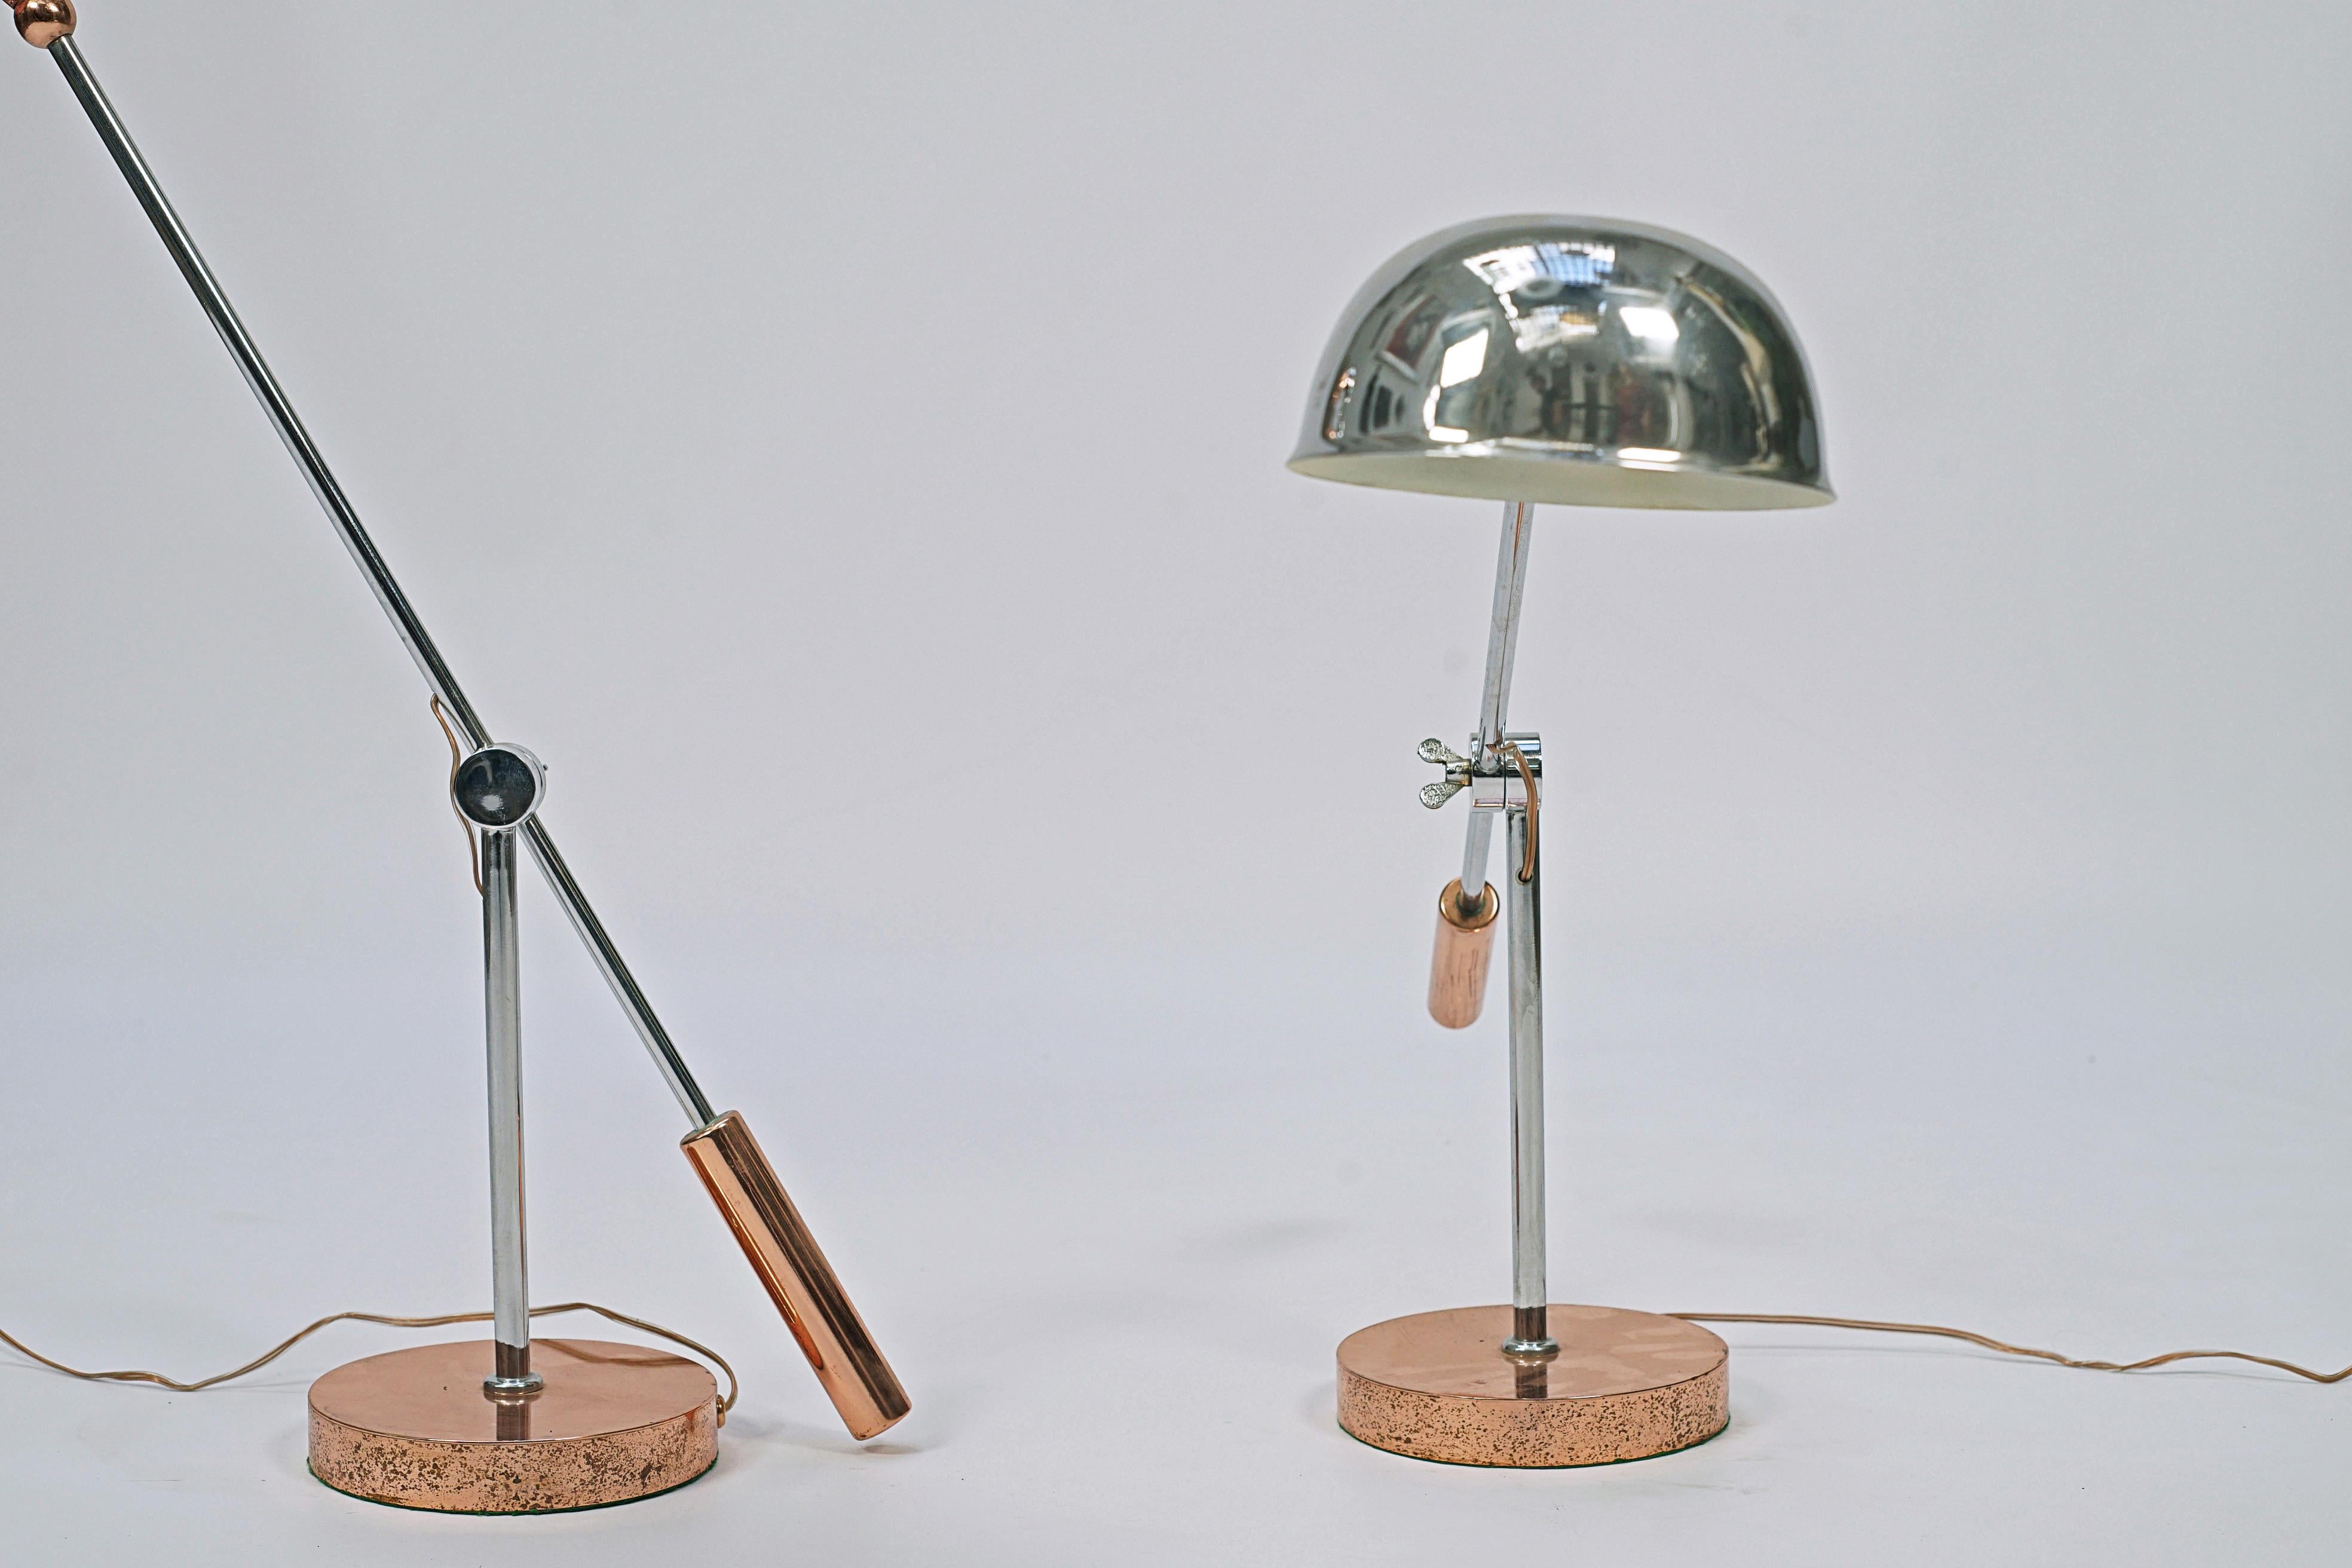 Pair of Art Deco desk lamps. Chromed bronze and details in copper.

Europe, circa 1940.